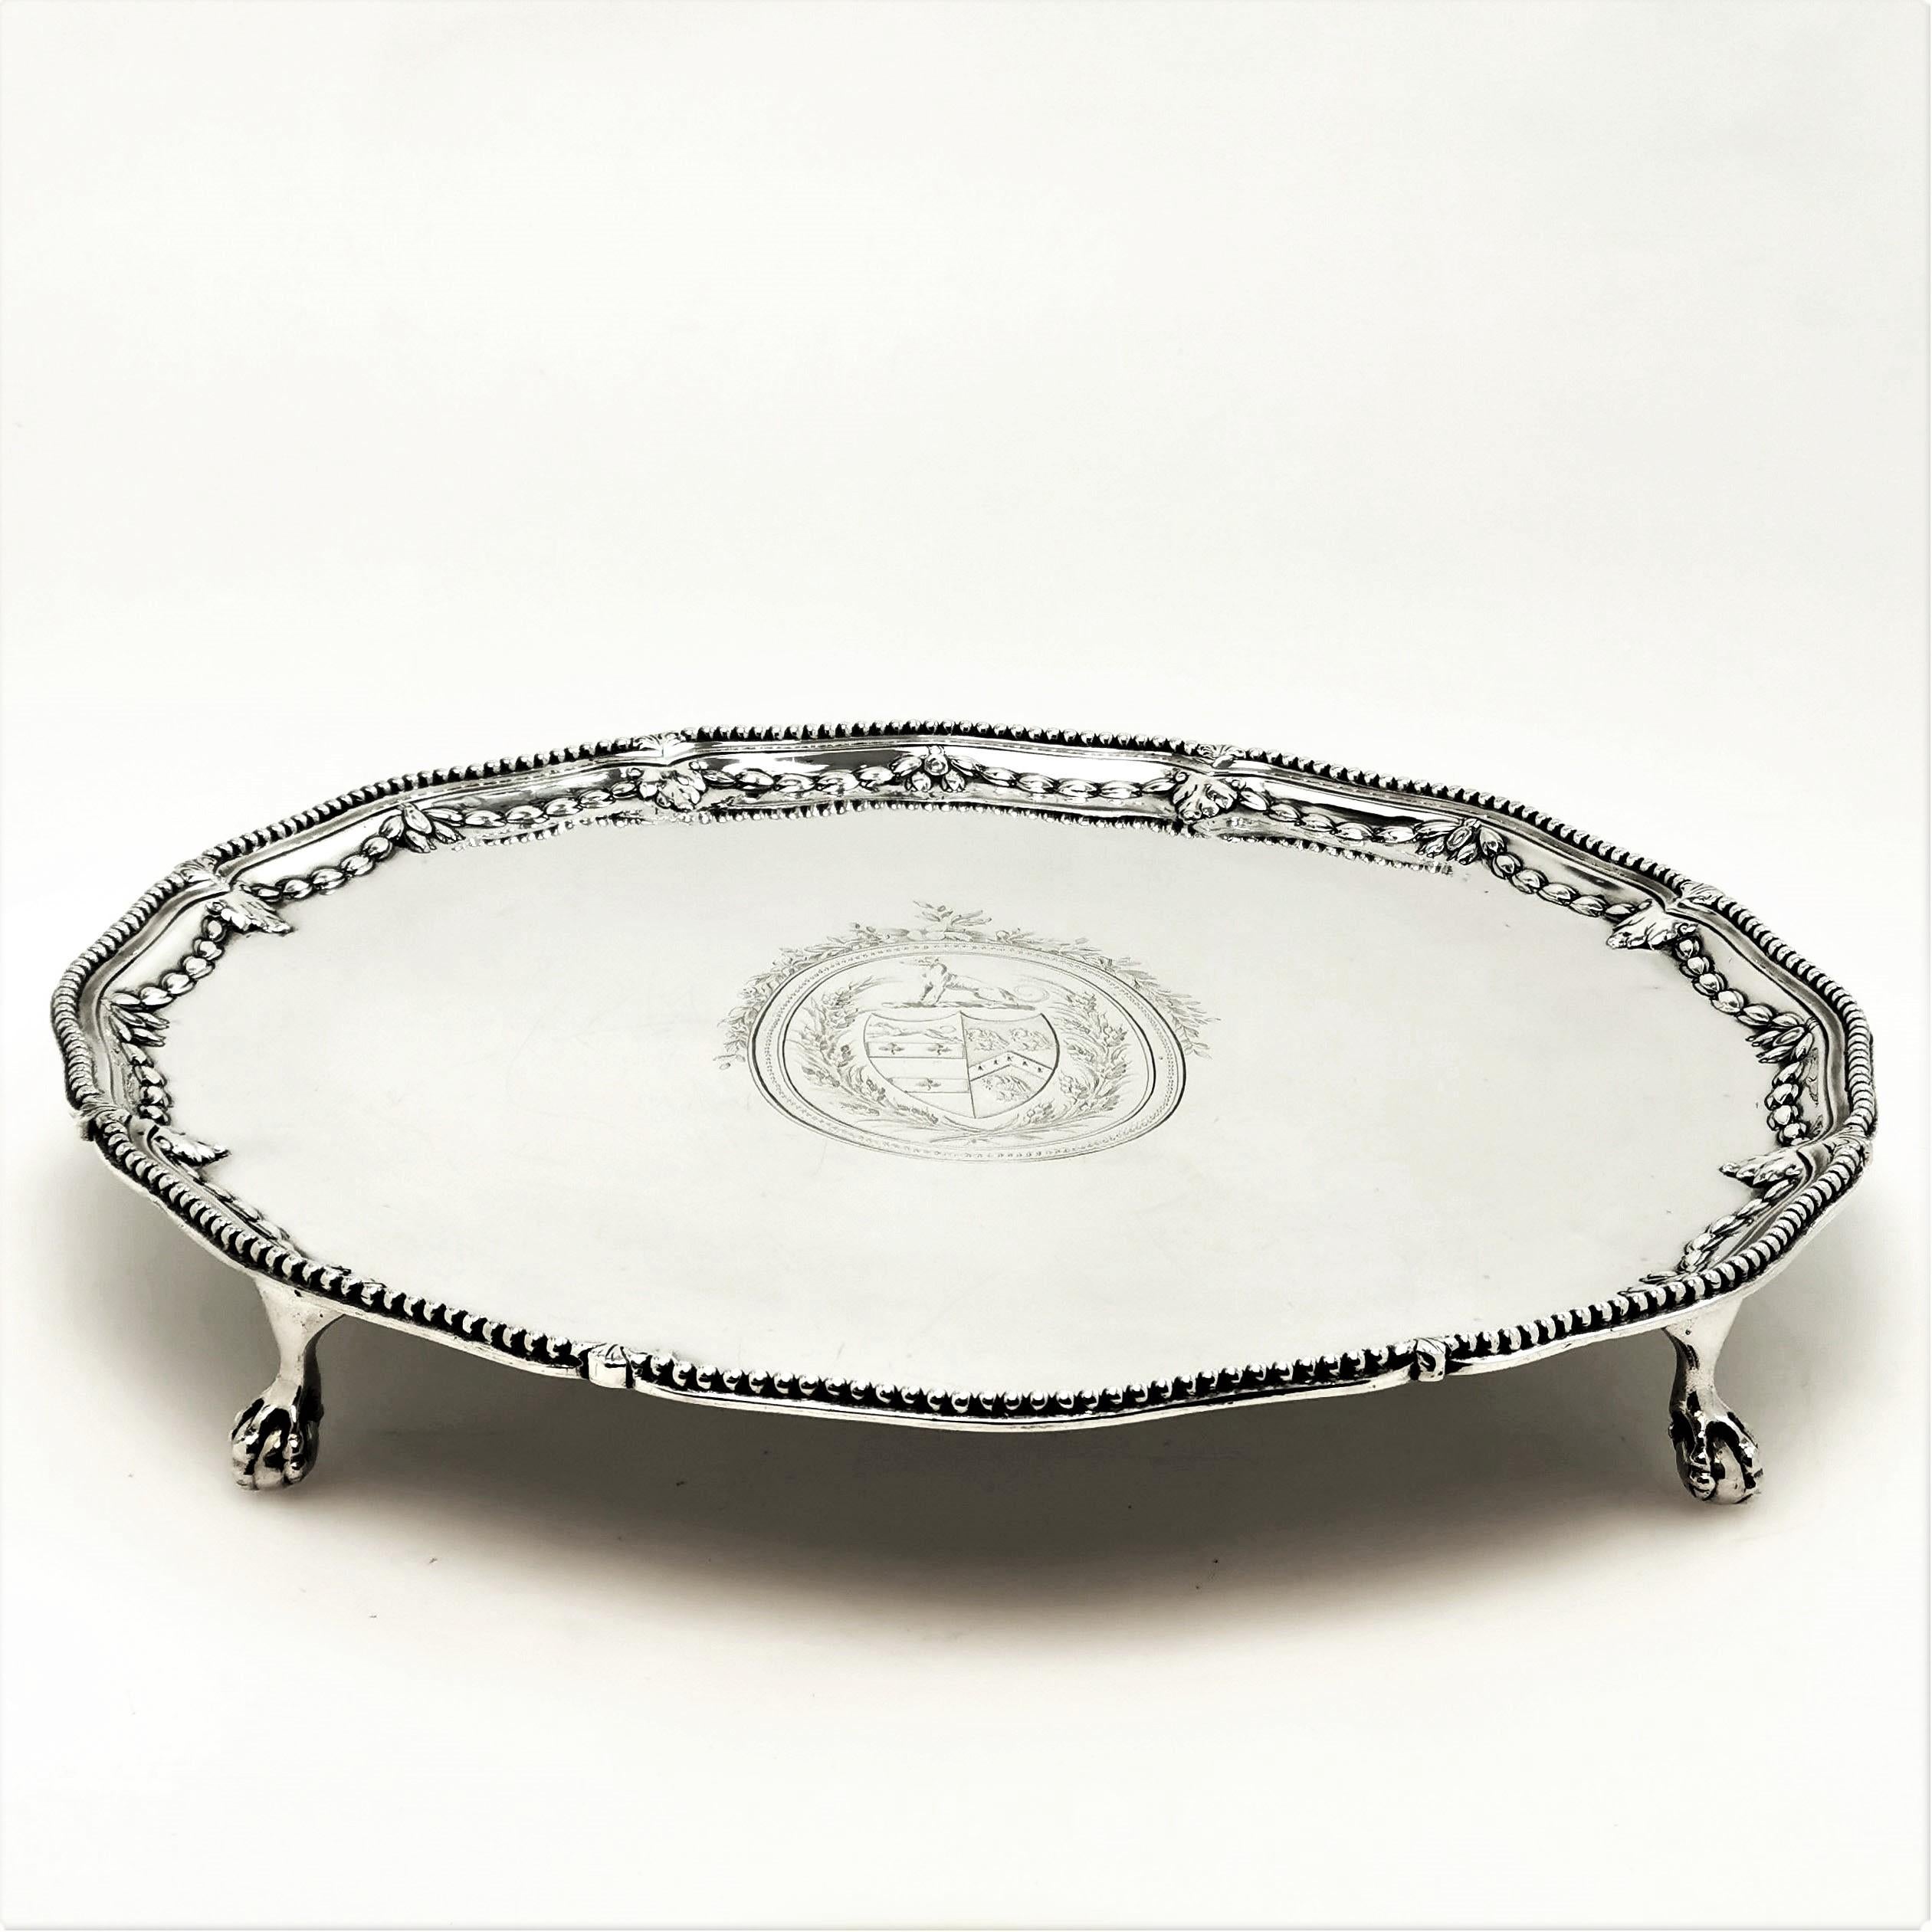 A beautiful antique Georgian round Silver Salver with a shaped beaded edge. The Salver is embellished with a chased wreath edge directly on the inside of the beaded rim. The Salver features an impressive engraved crest in the centre. The Salver